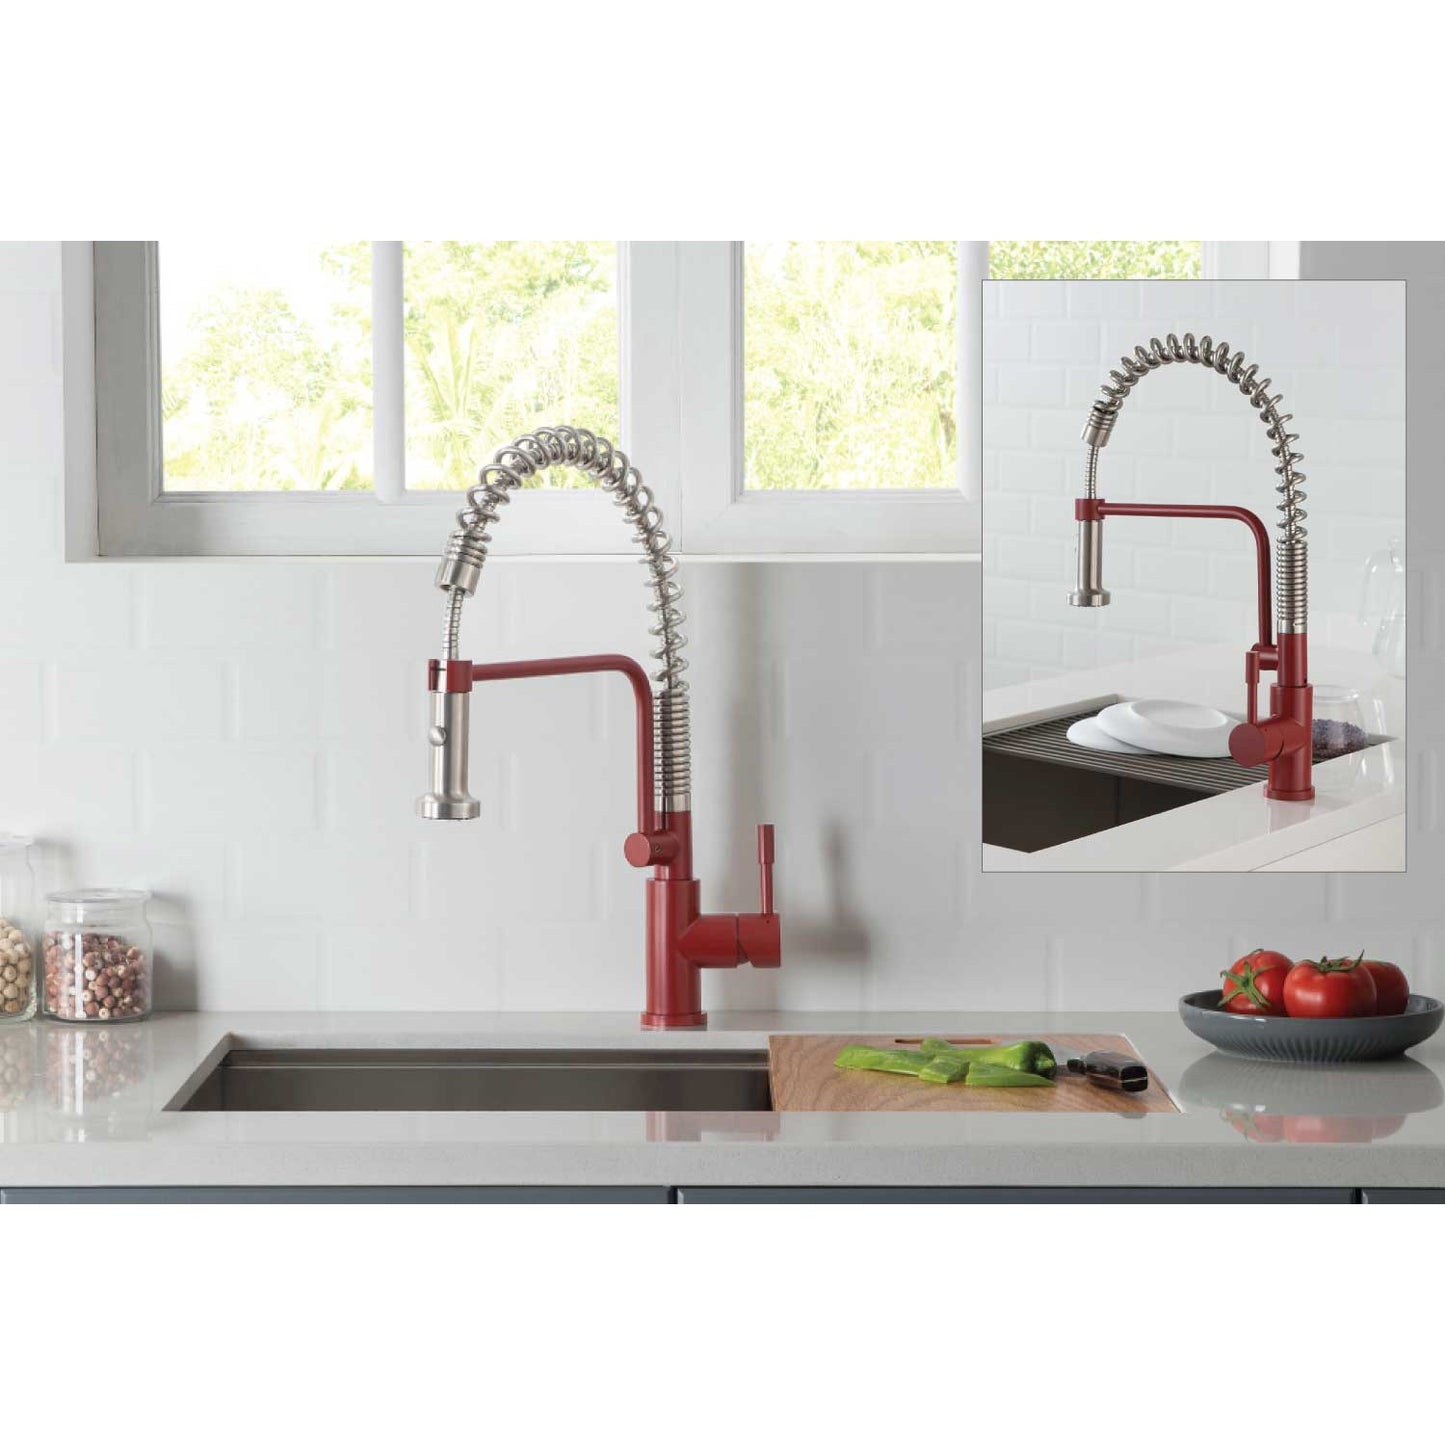 Isenberg Klassiker Caso 19" Single Hole Gloss White Semi-Professional Stainless Steel Pull-Down Kitchen Faucet With Dual Function Sprayer